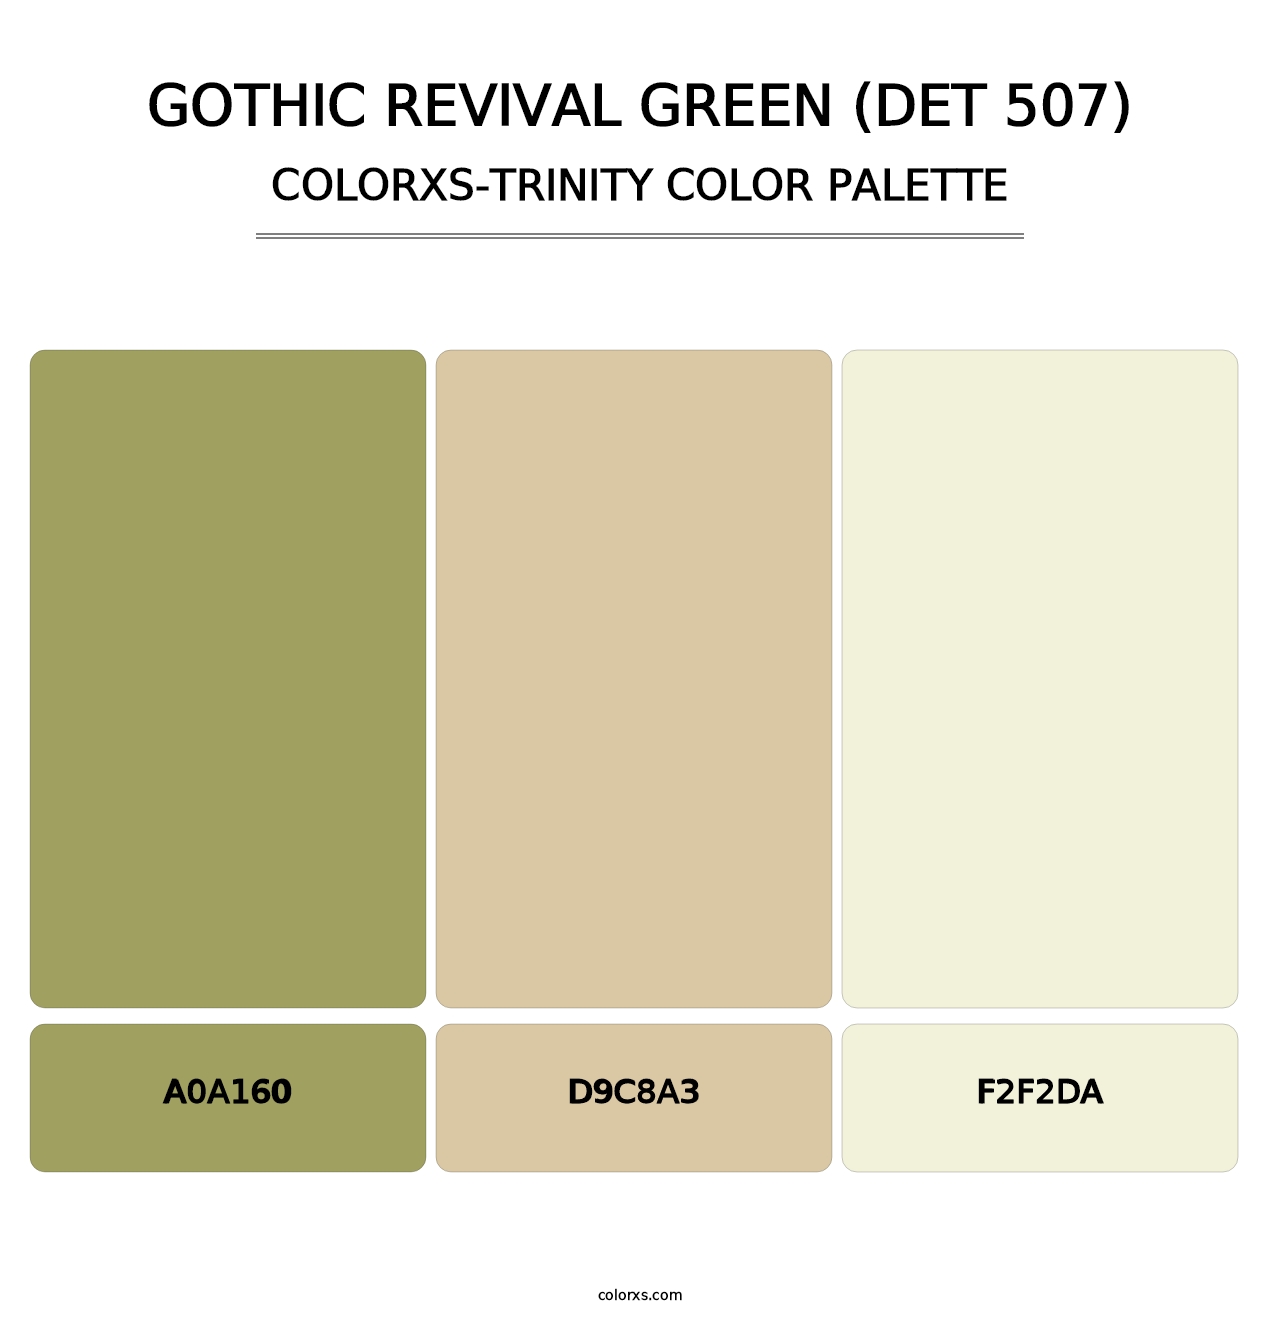 Gothic Revival Green (DET 507) - Colorxs Trinity Palette